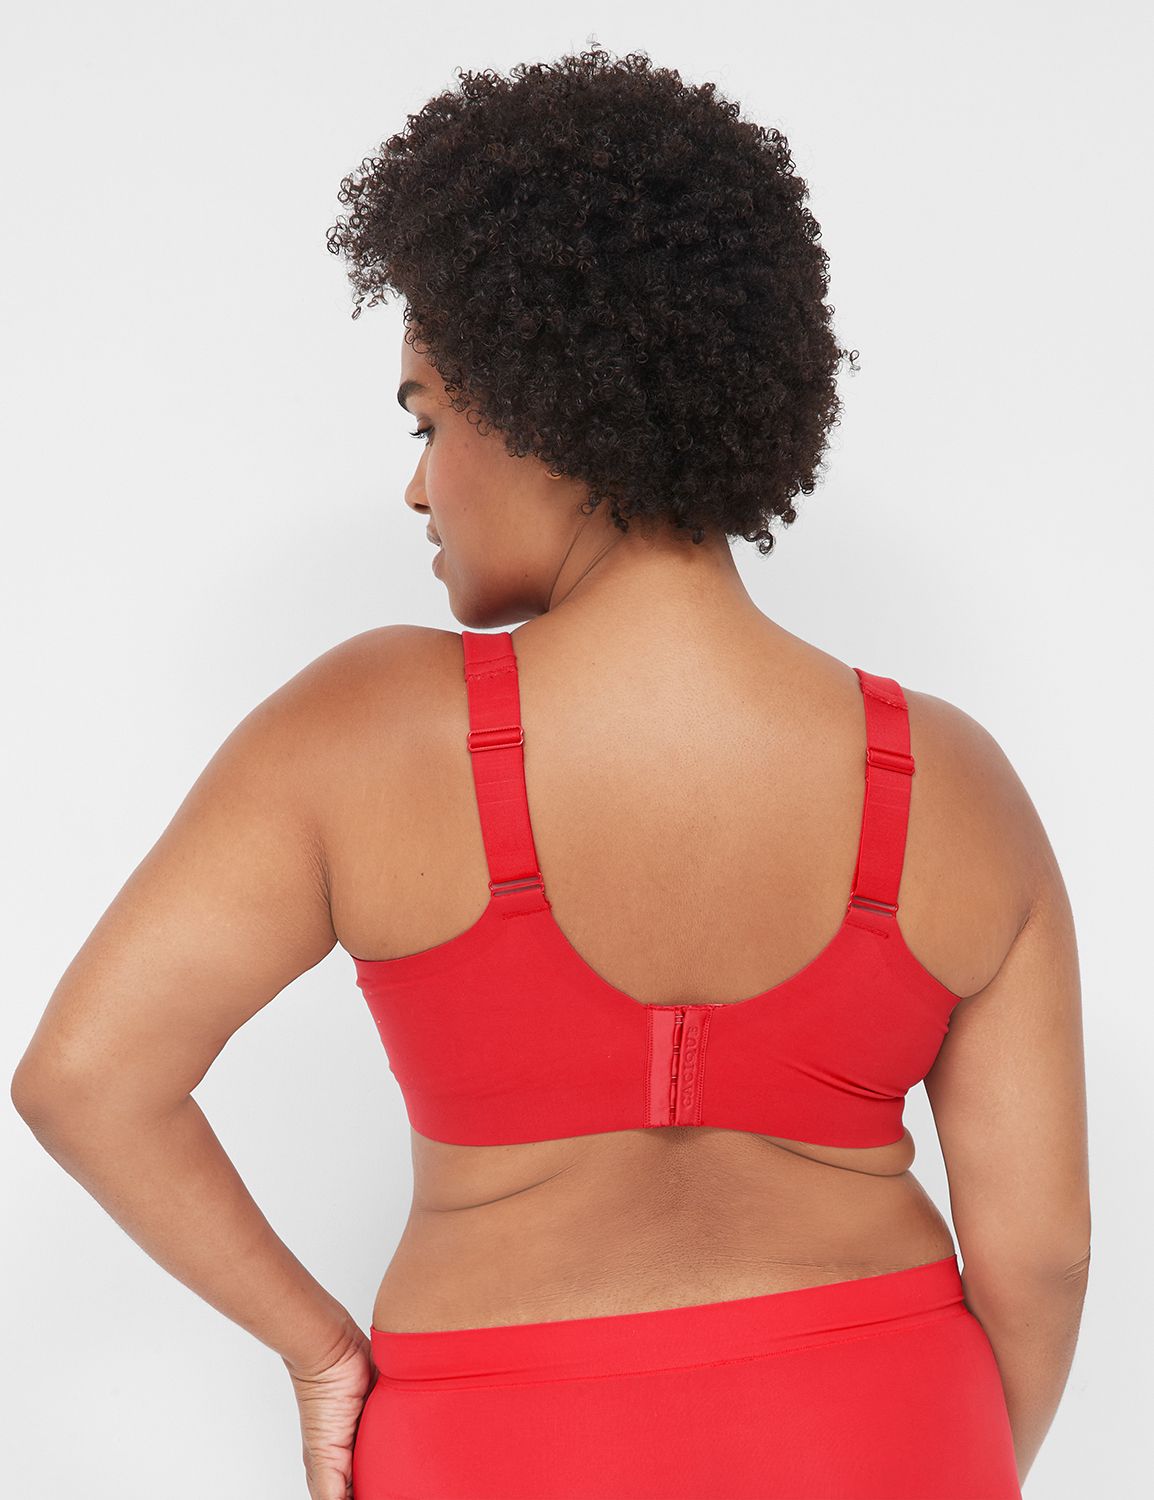 Red Supportive Plus Size Bras For Women